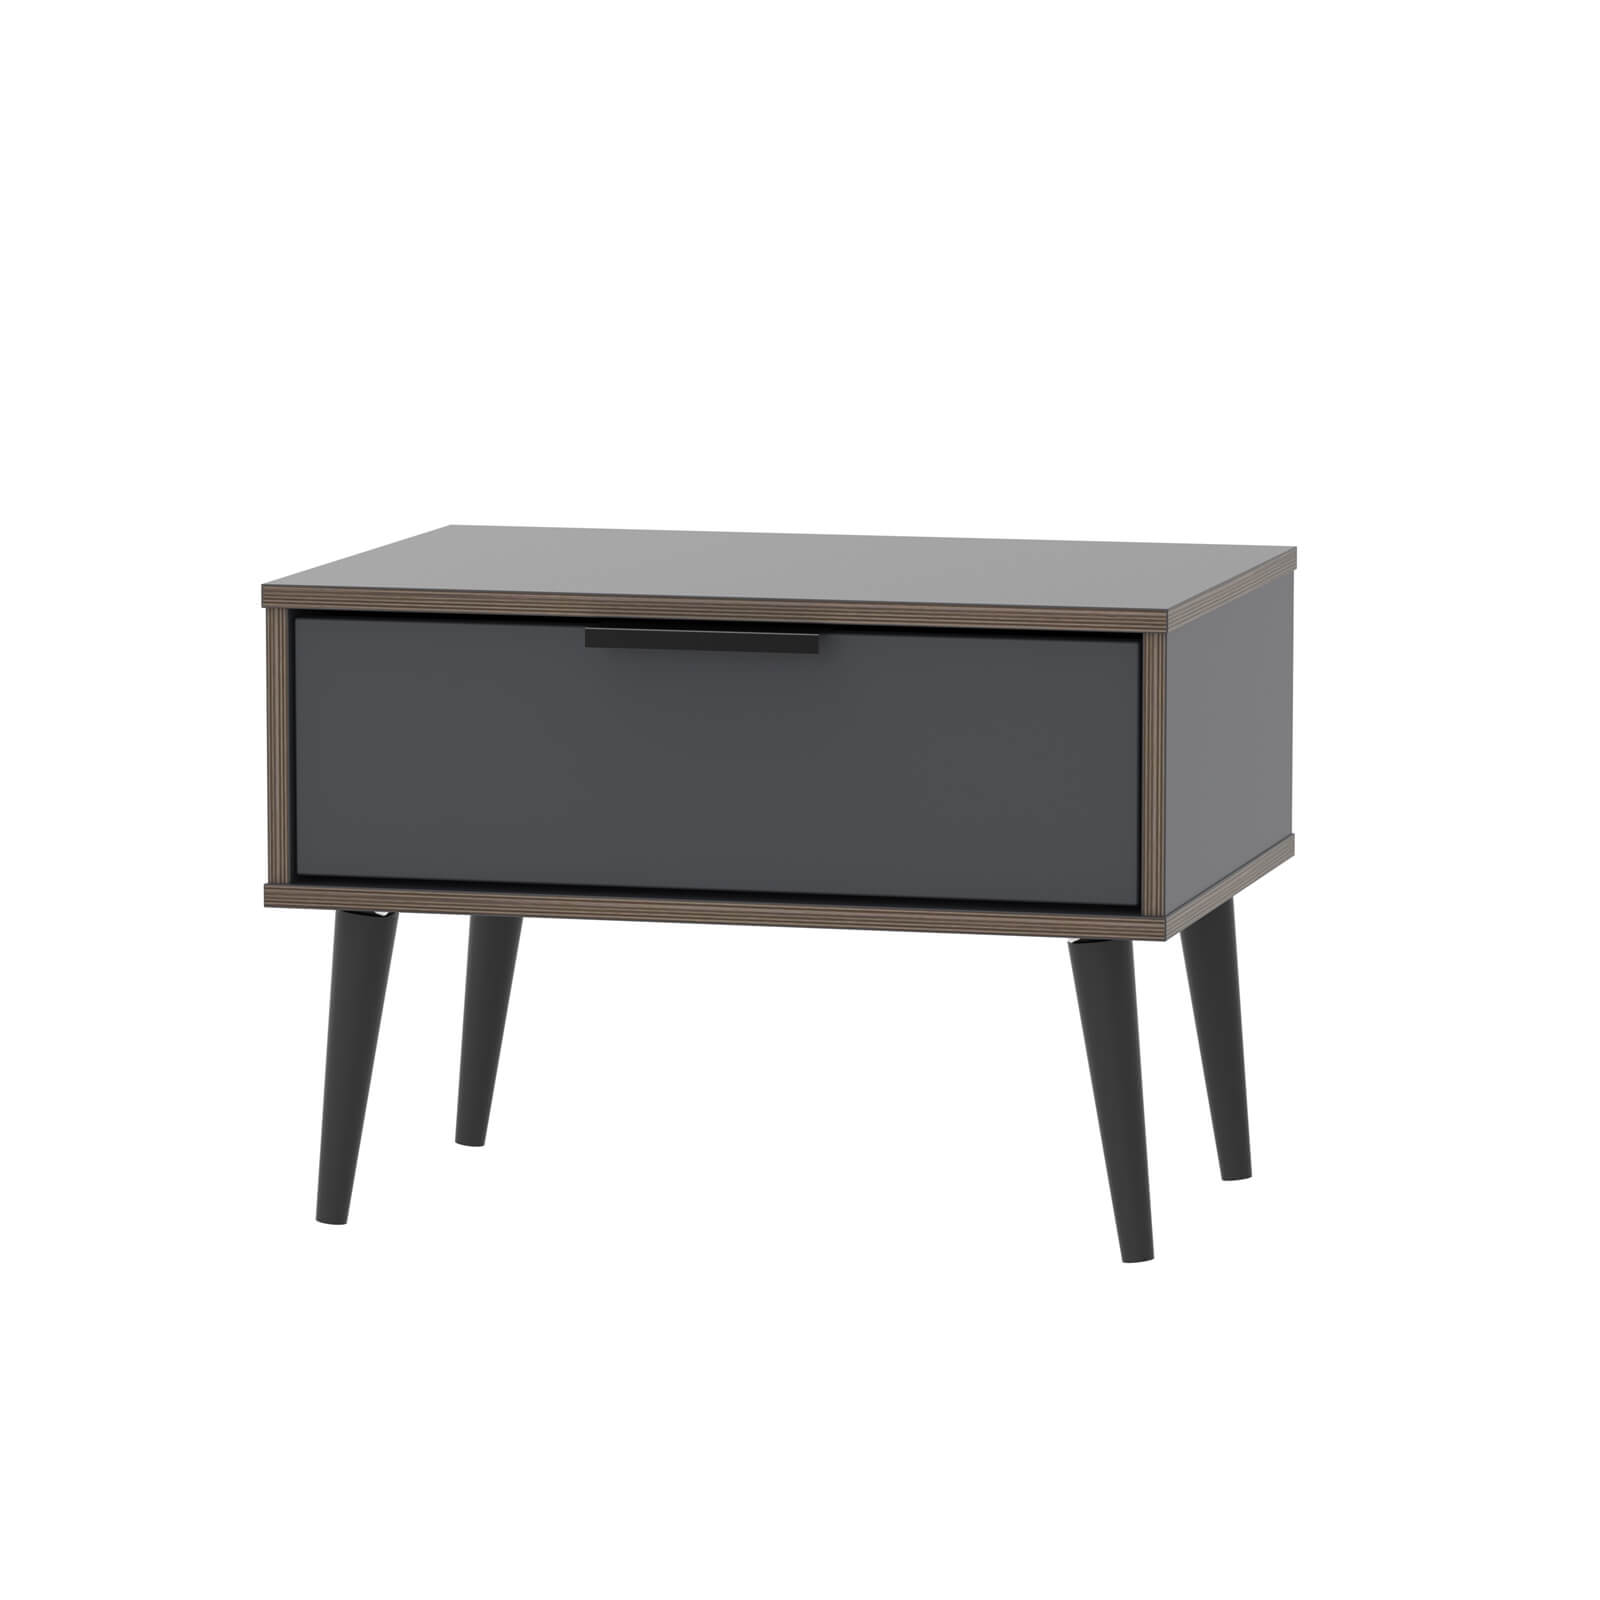 Tokyo 1 Drawer Side Table with Legs - Graphite